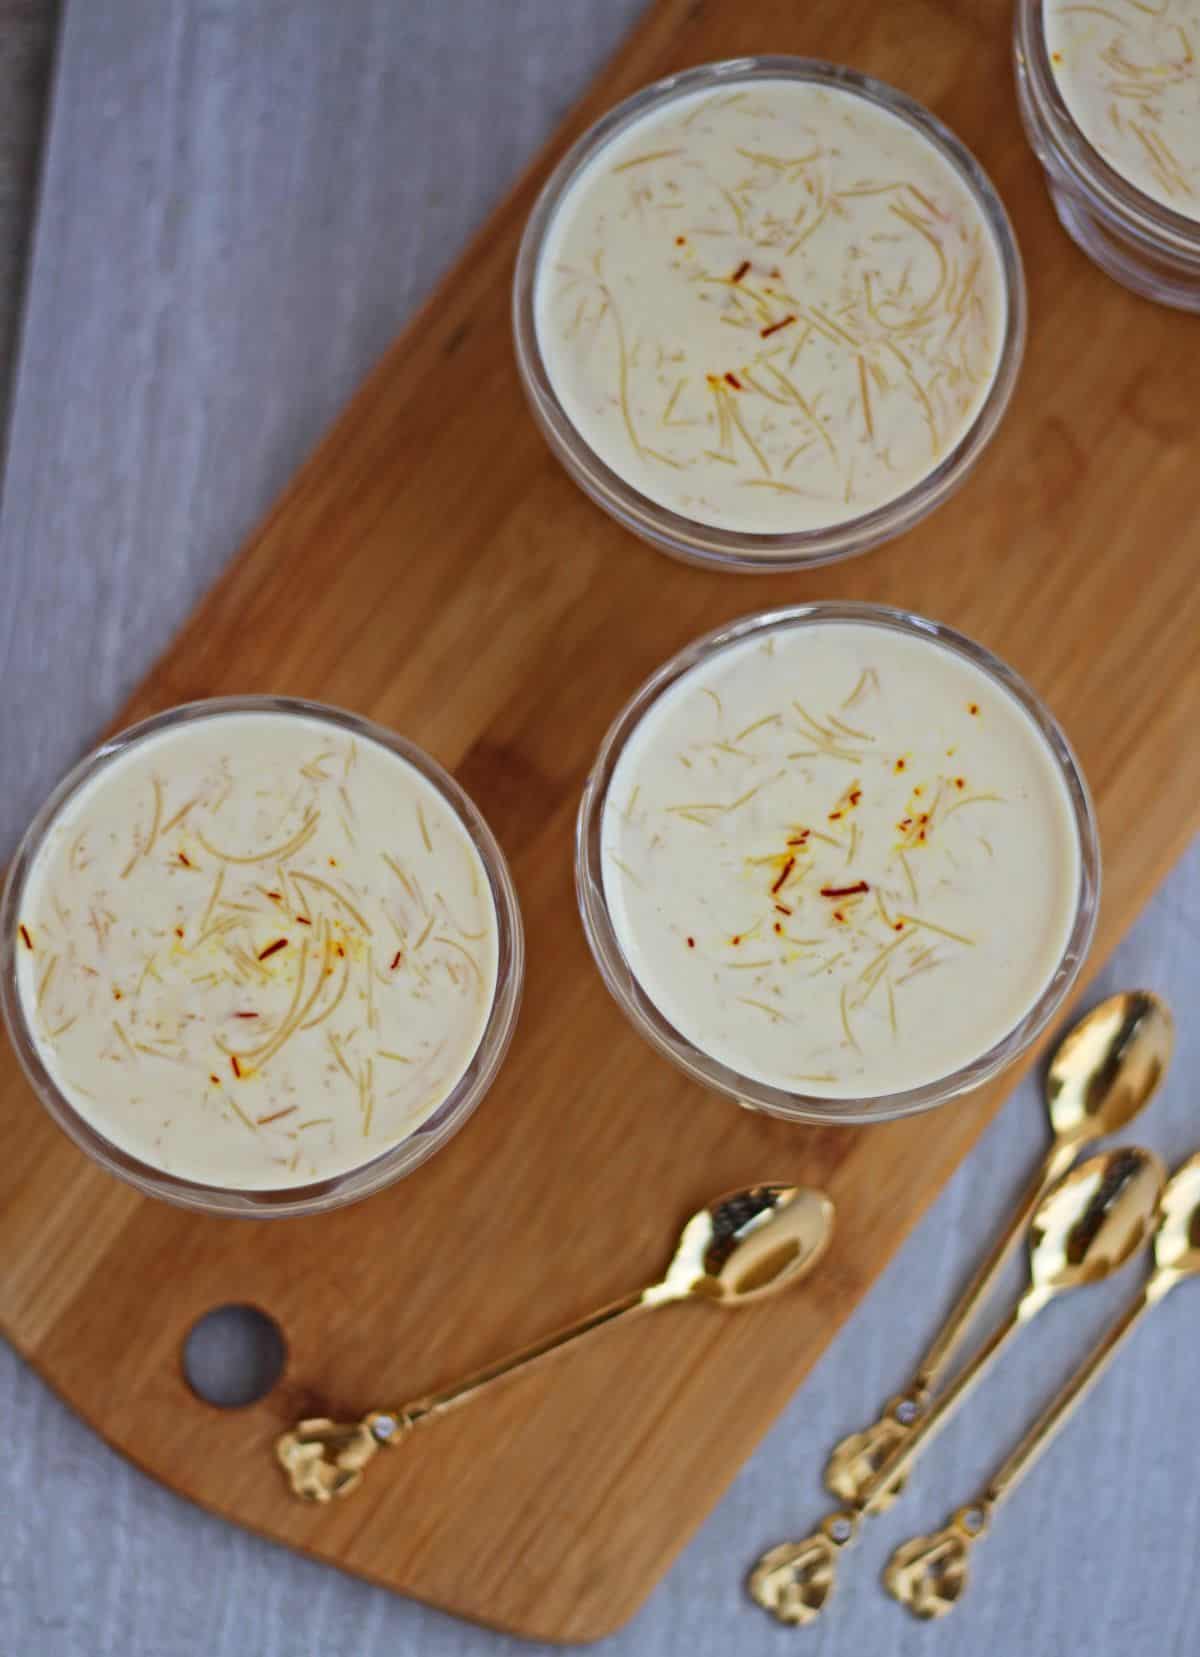 Semiya payasam with saffron on top and spoons on the side